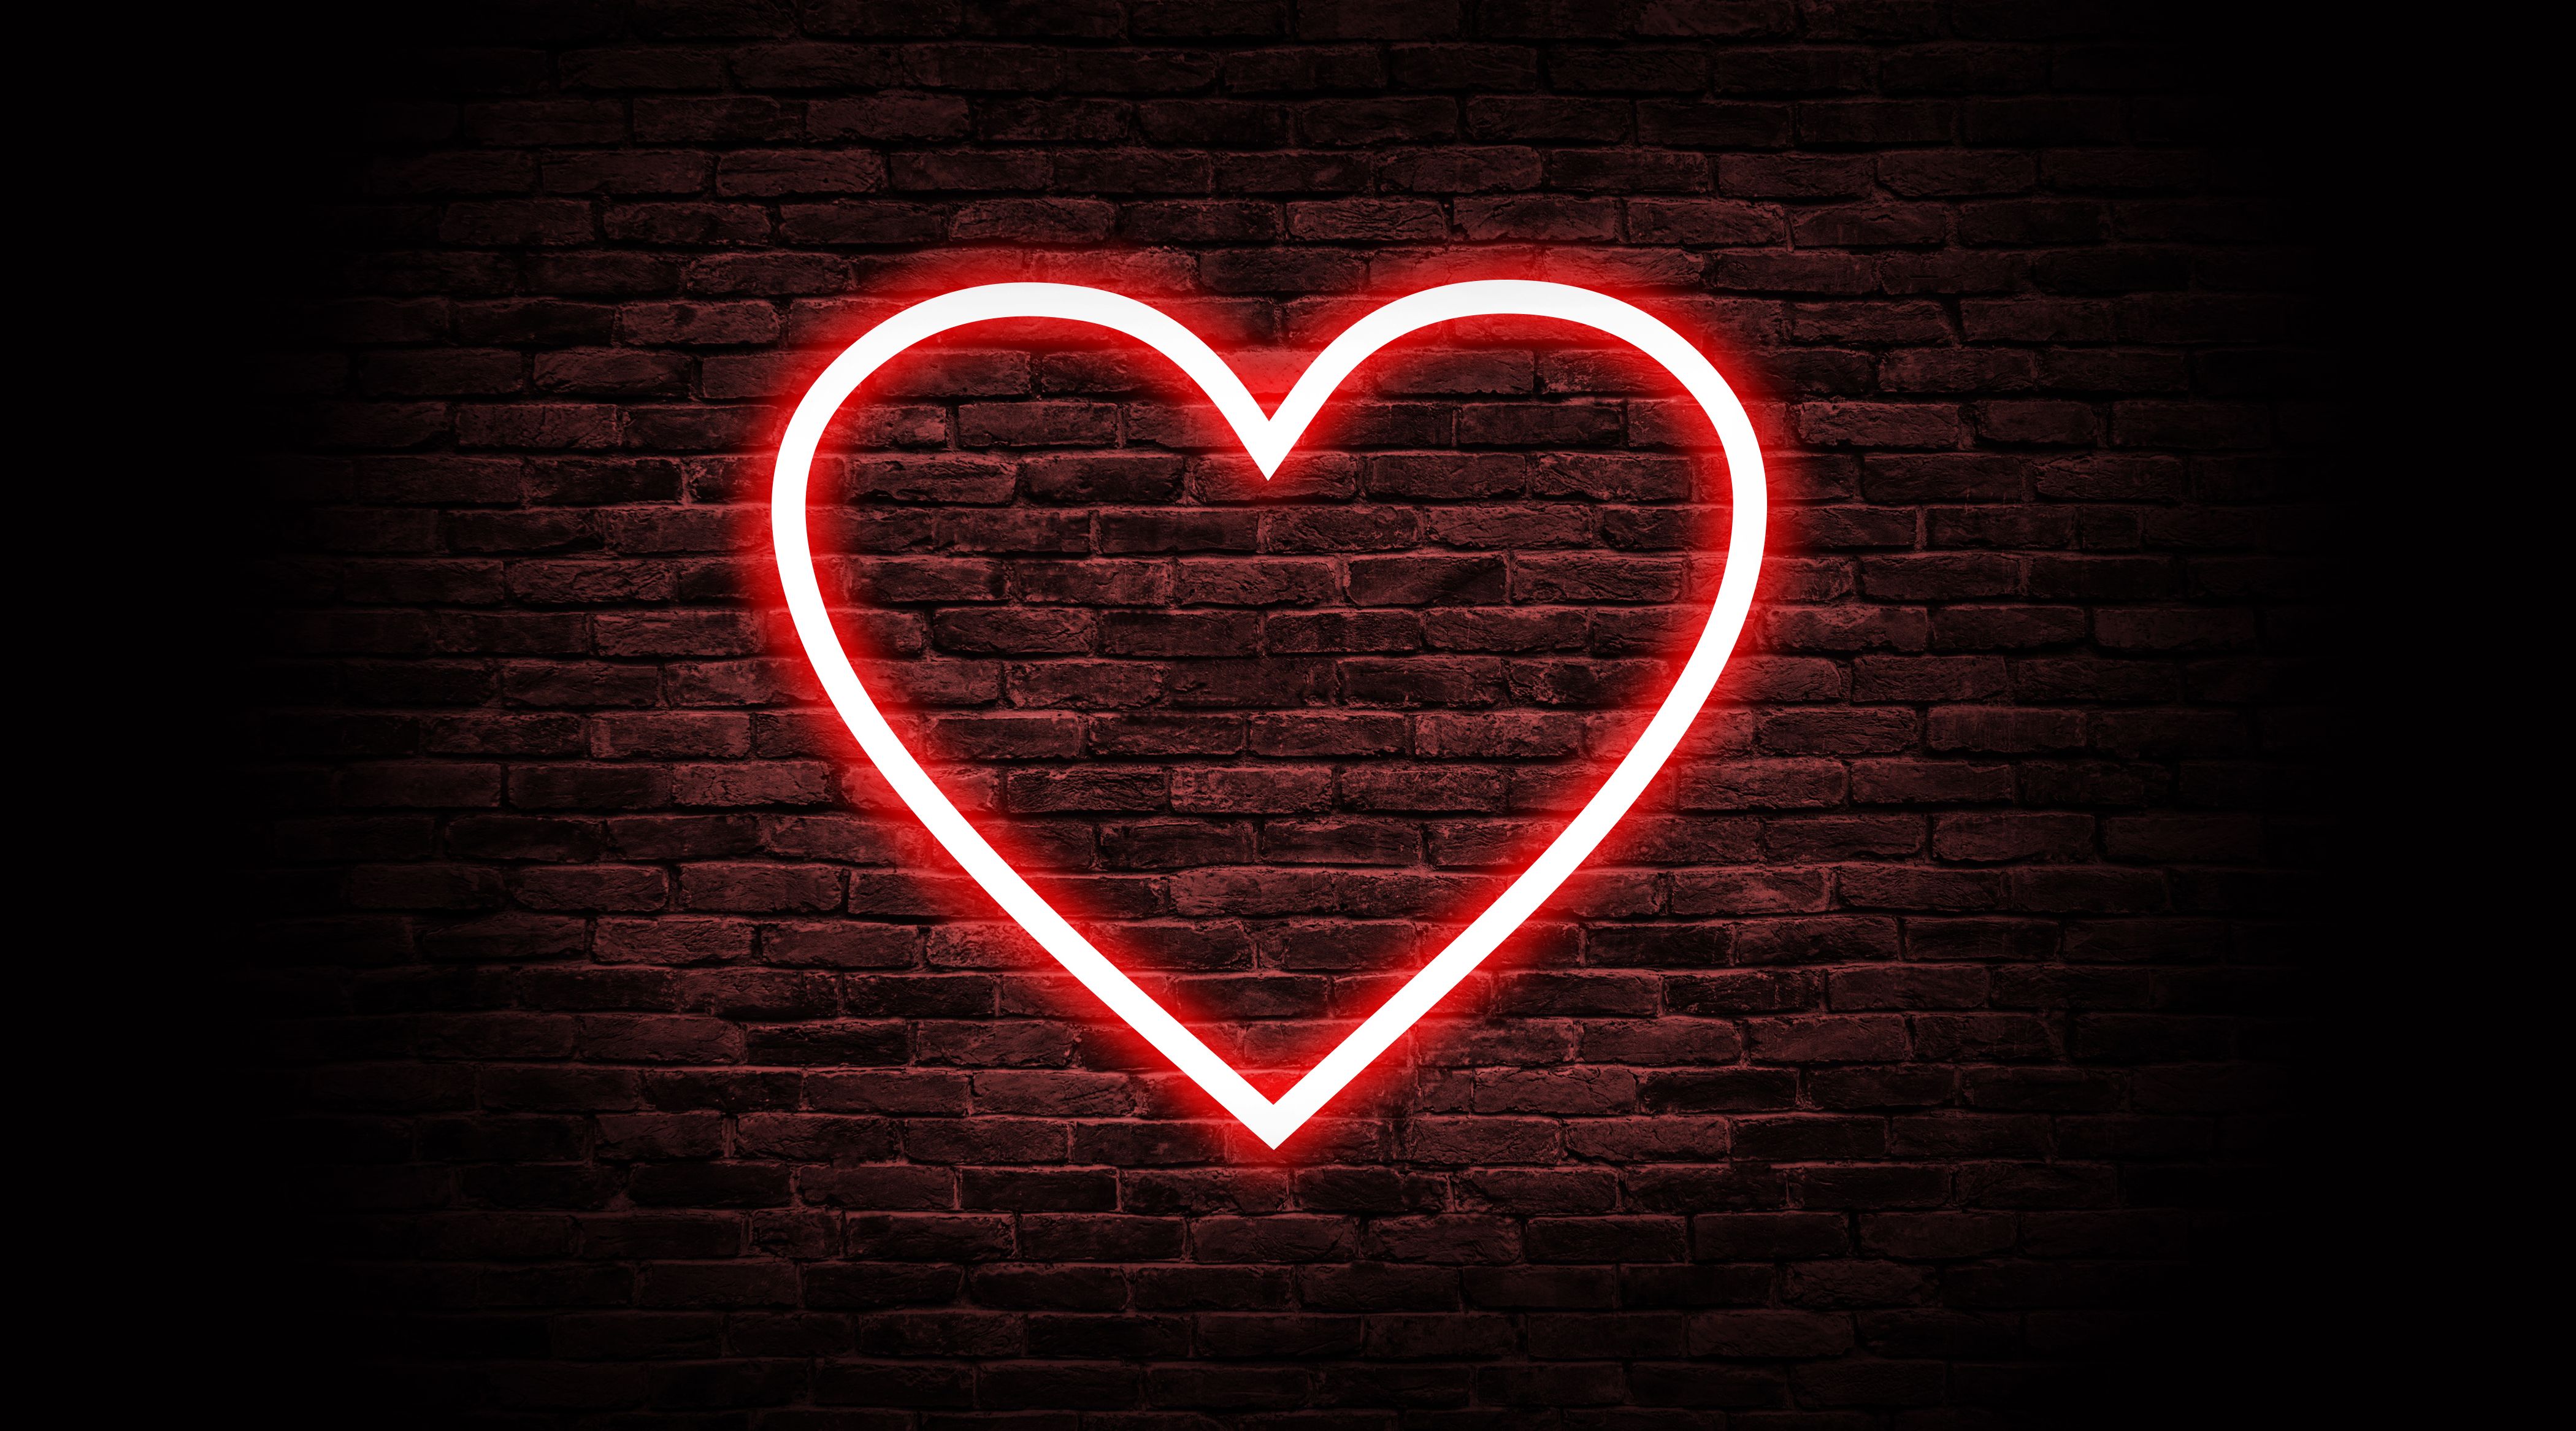 Wallpaper Love heart, Neon, Brick wall, 4K, Love,. Wallpaper for iPhone, Android, Mobile and Desktop